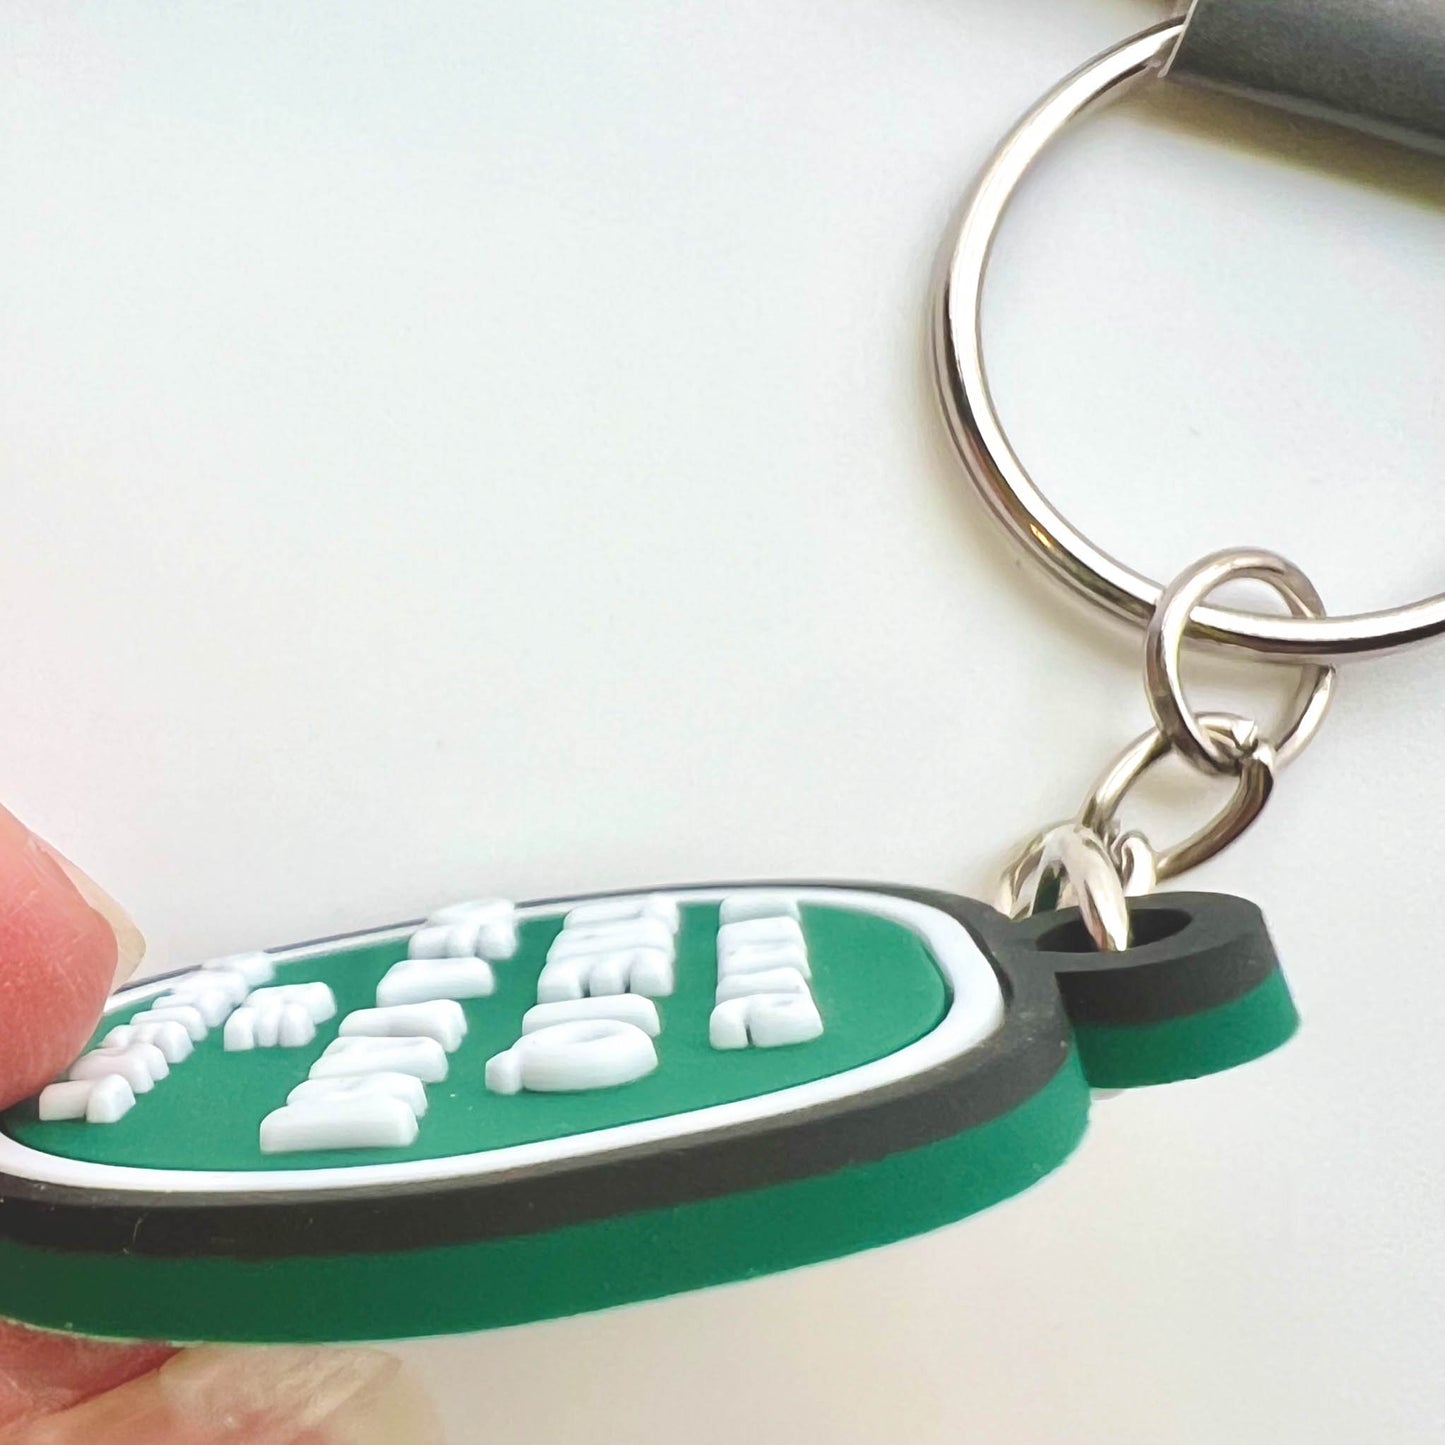 Funny Gag Gift Keychain - I Have the IQ of a Yam.